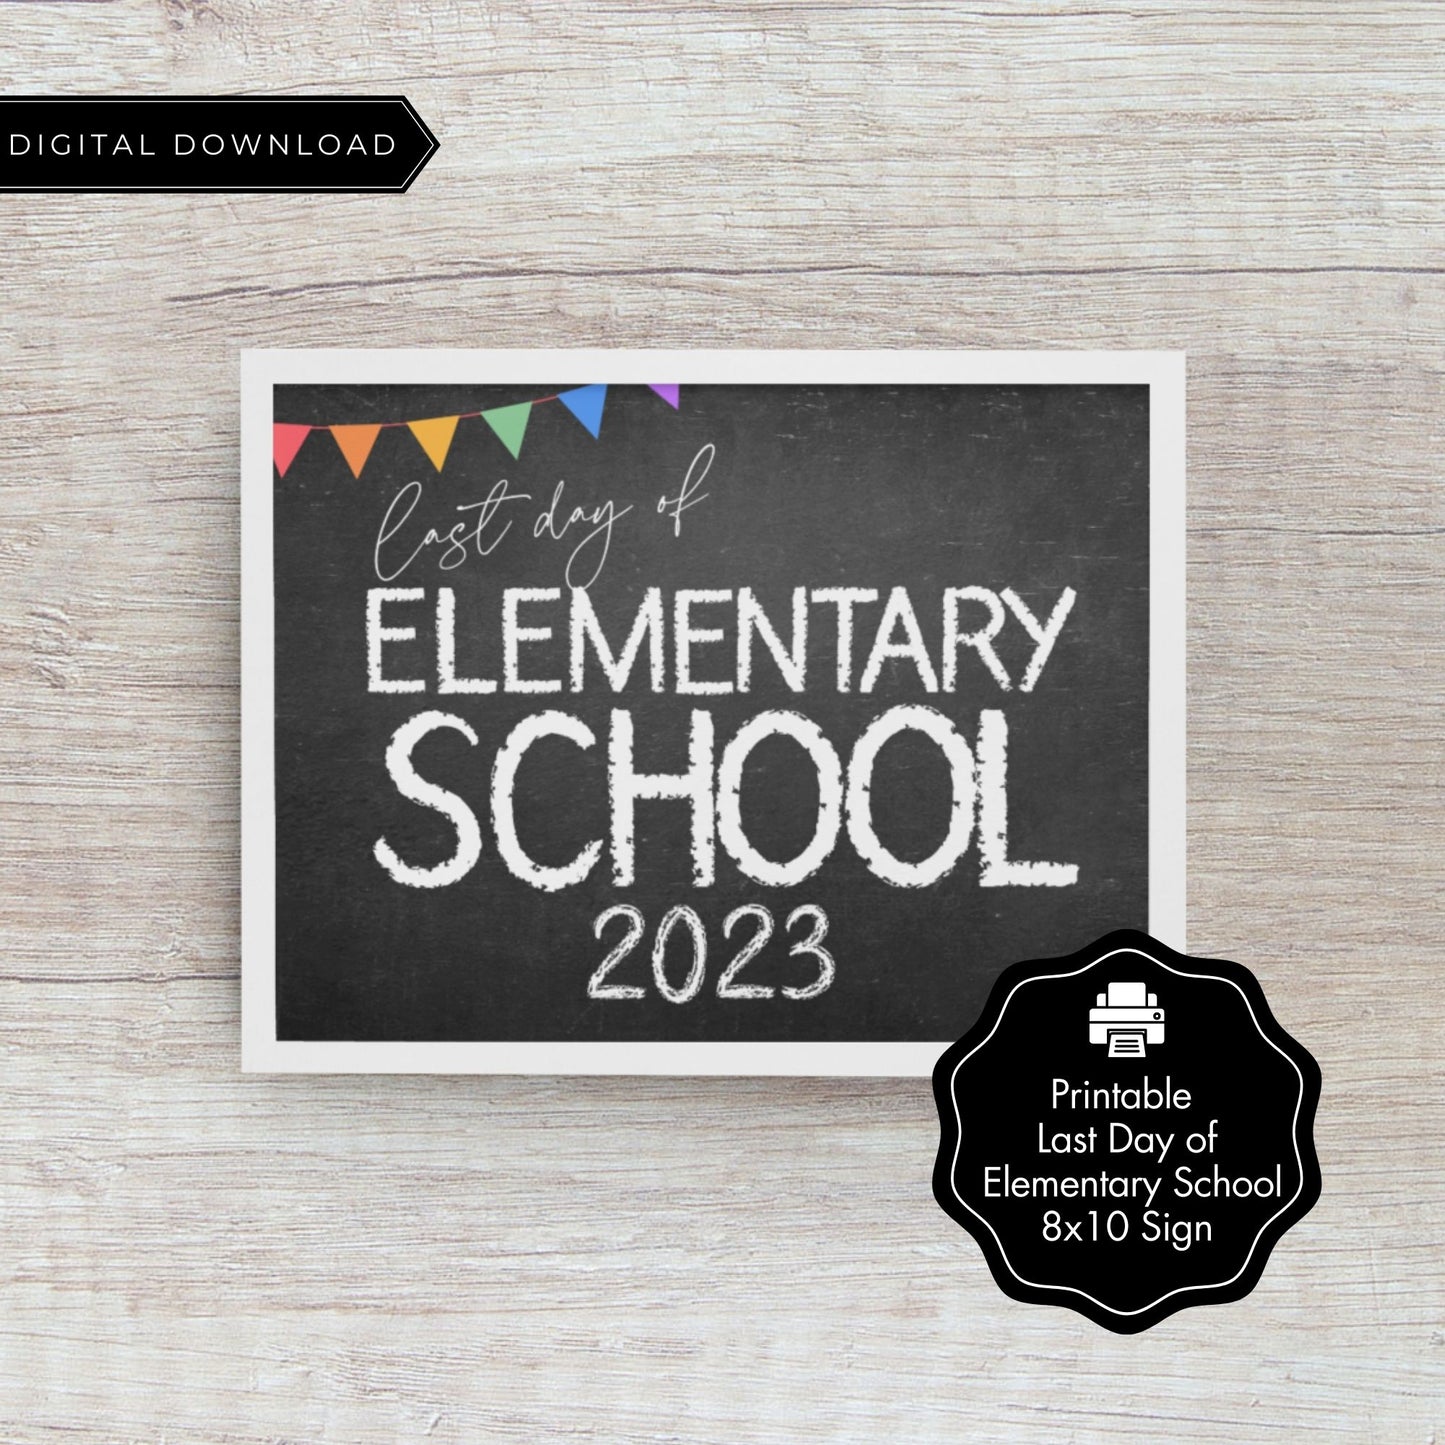 Last Day of Elementary Sign 2023 - 8x10 Landscape - Printable